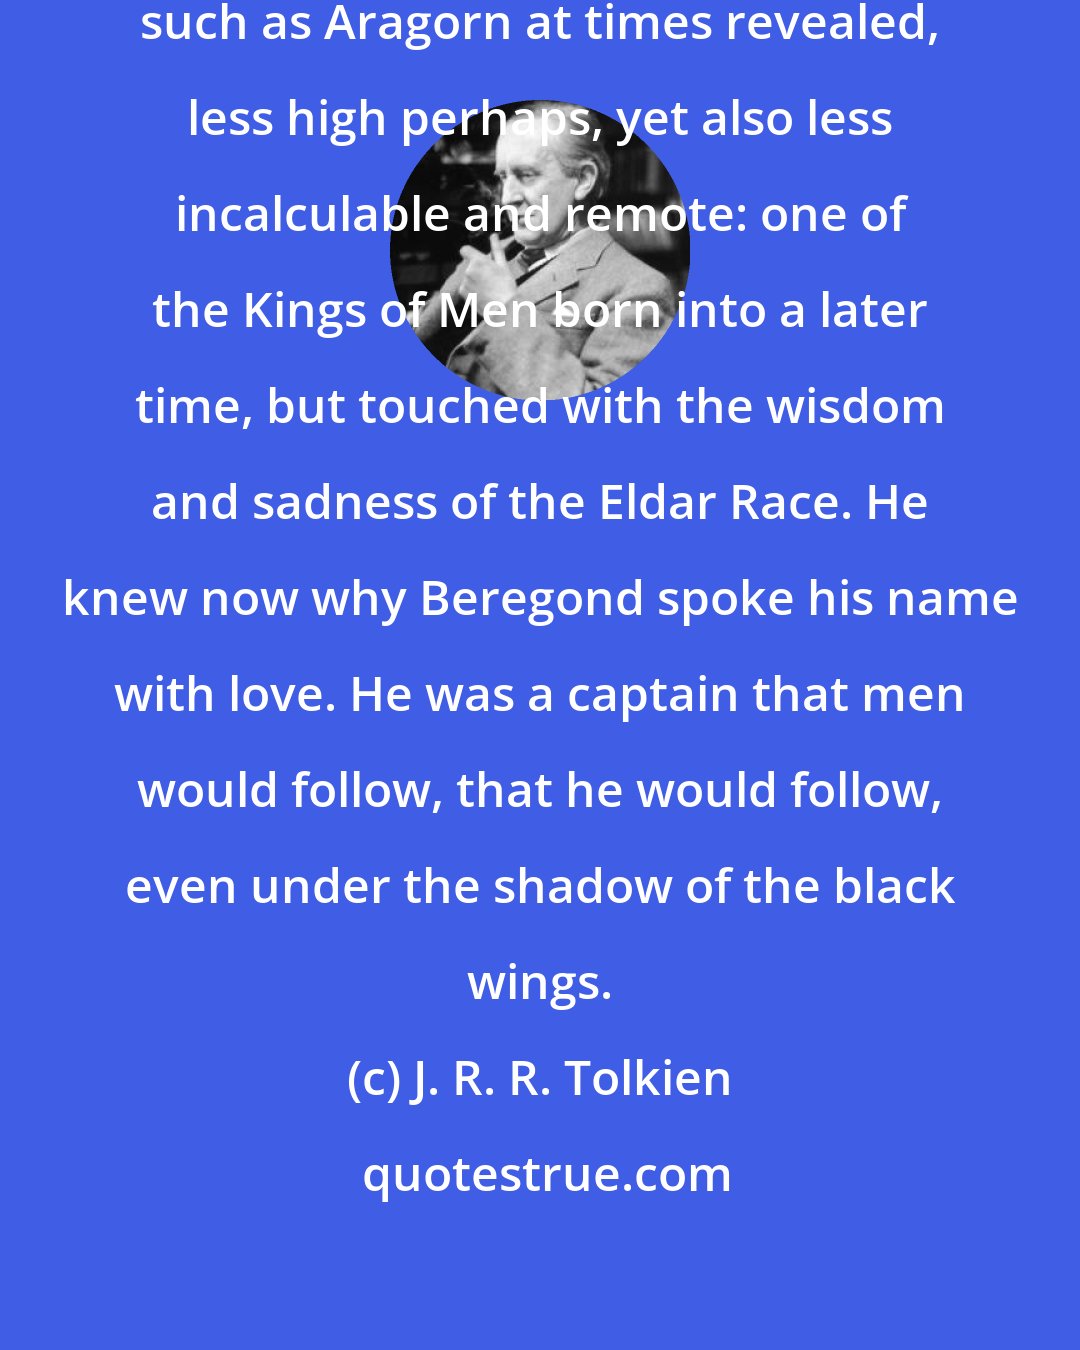 J. R. R. Tolkien: Here was one with an air of high nobility such as Aragorn at times revealed, less high perhaps, yet also less incalculable and remote: one of the Kings of Men born into a later time, but touched with the wisdom and sadness of the Eldar Race. He knew now why Beregond spoke his name with love. He was a captain that men would follow, that he would follow, even under the shadow of the black wings.